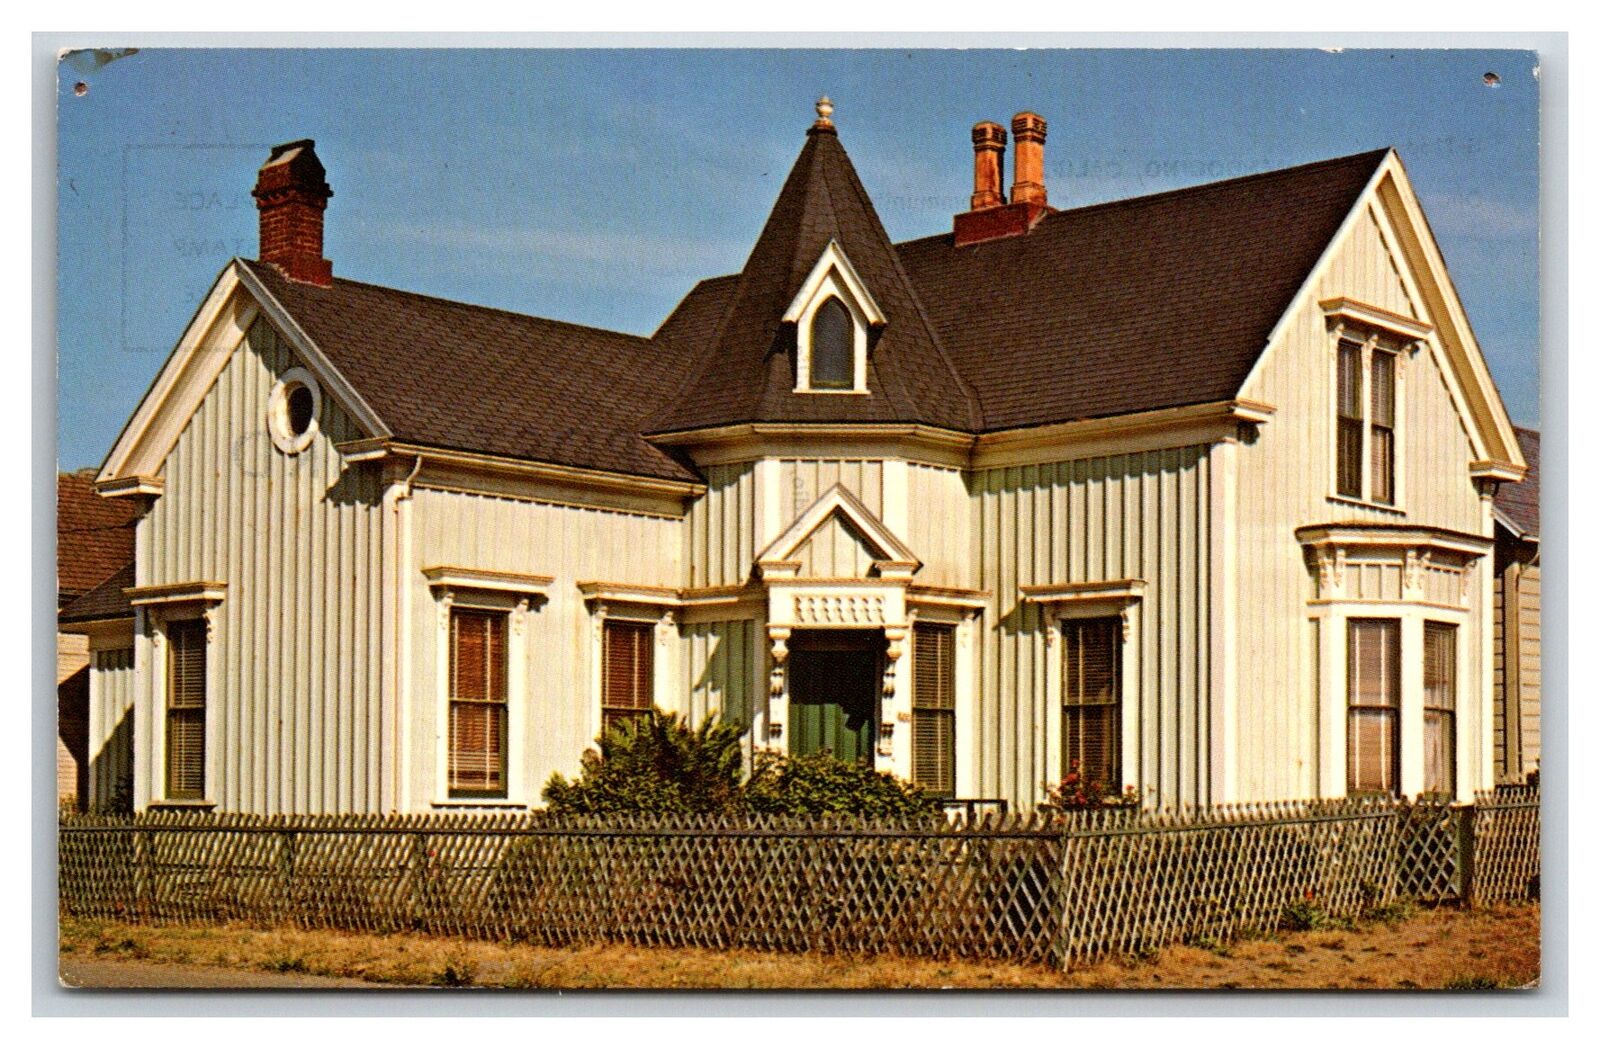 A Fine Old Home, Mendocino, CA - Mid 1900s UNPOSTED nice